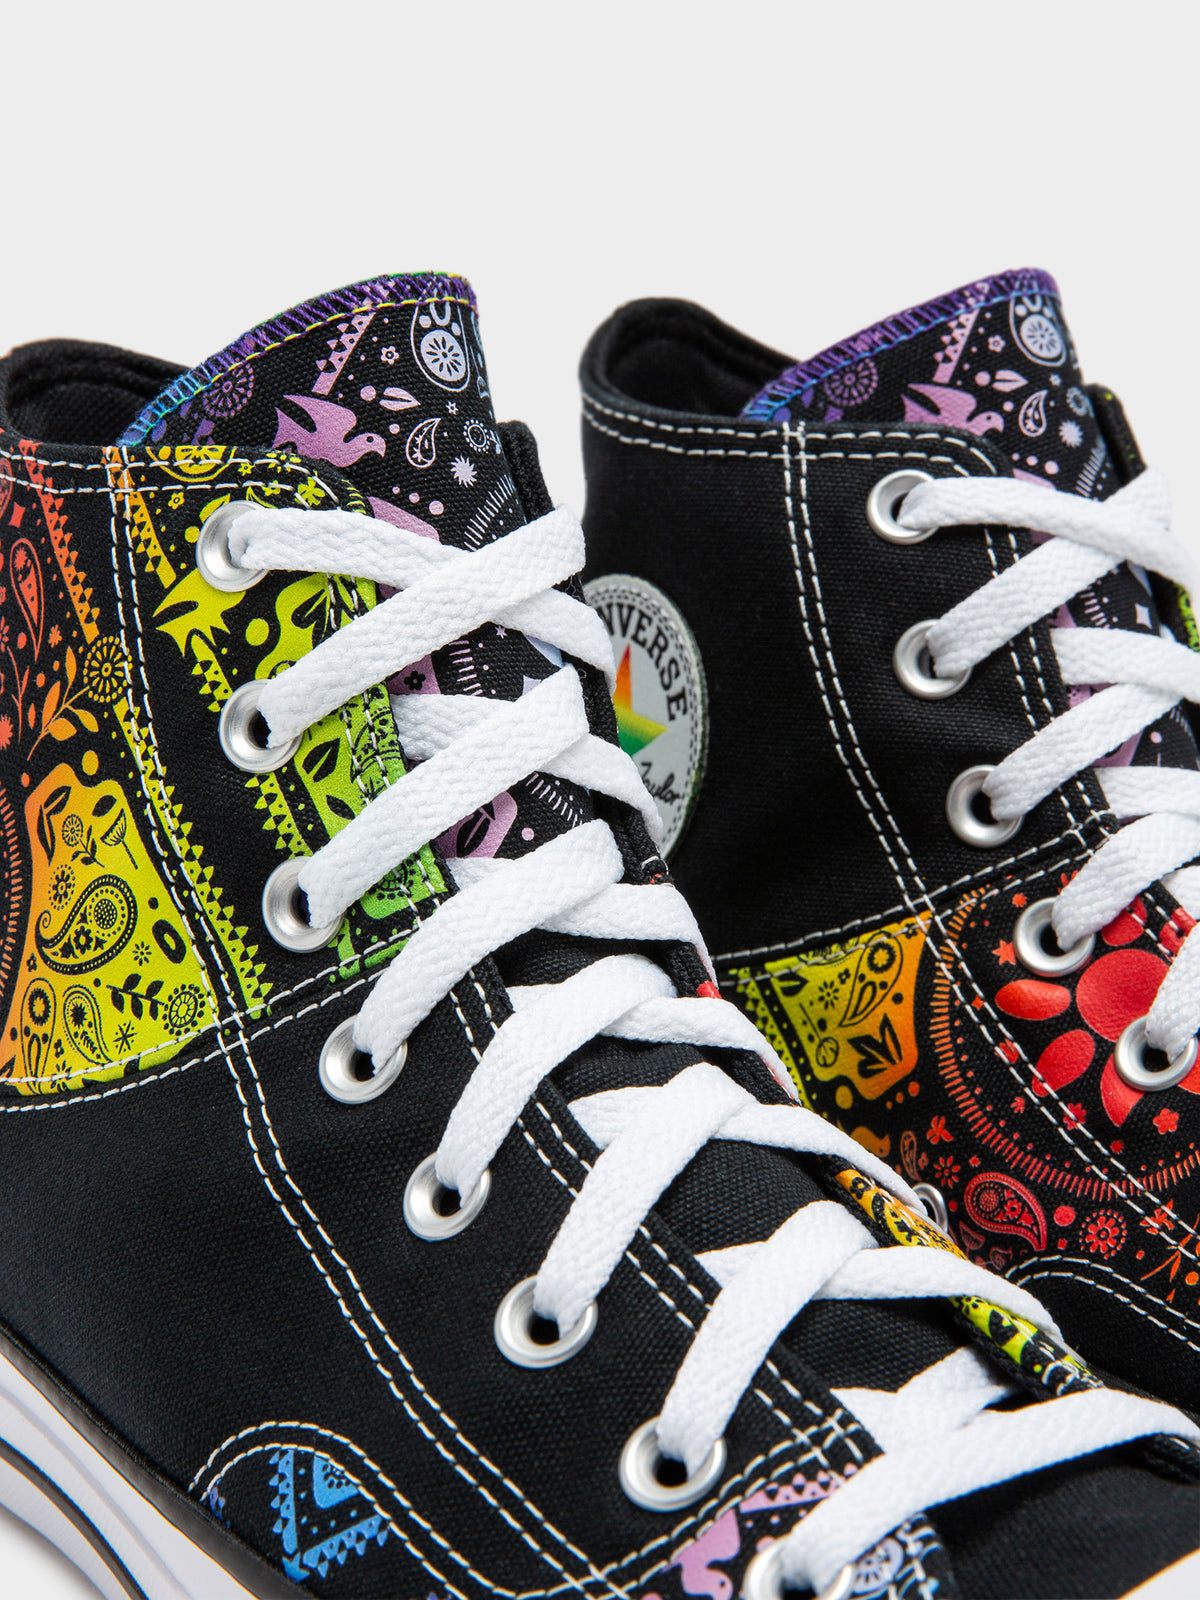 Unisex Chuck Taylor All Star Pride High-Top Sneakers in Black &amp; Rainbow Paisley